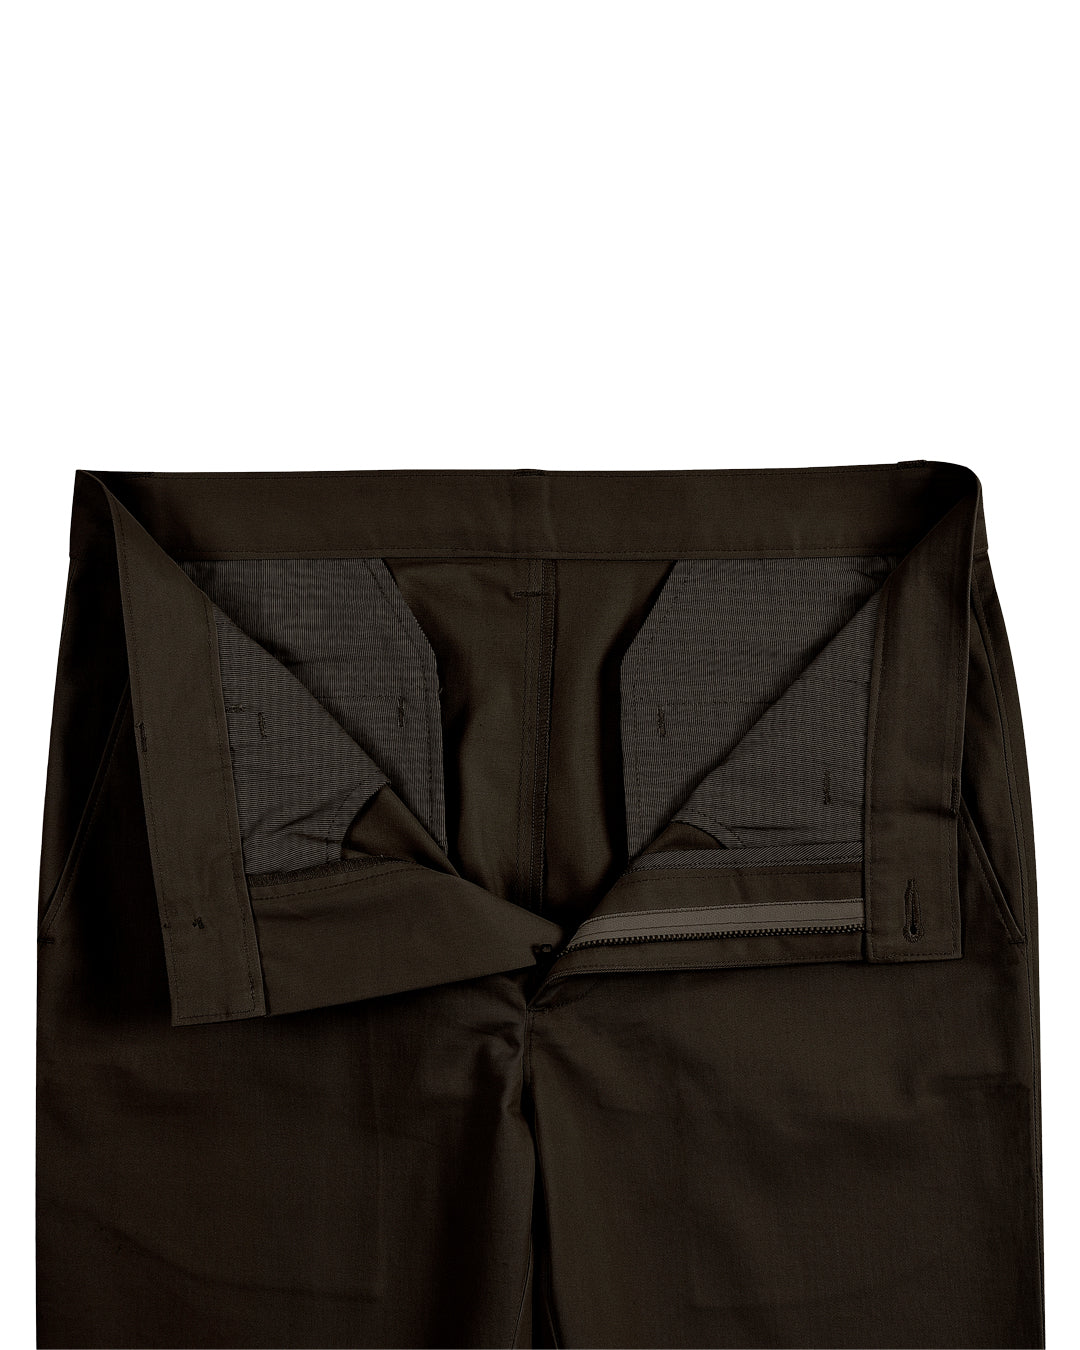 Front open view of custom Genoa Chino pants for men by Luxire in dark brown chocolate